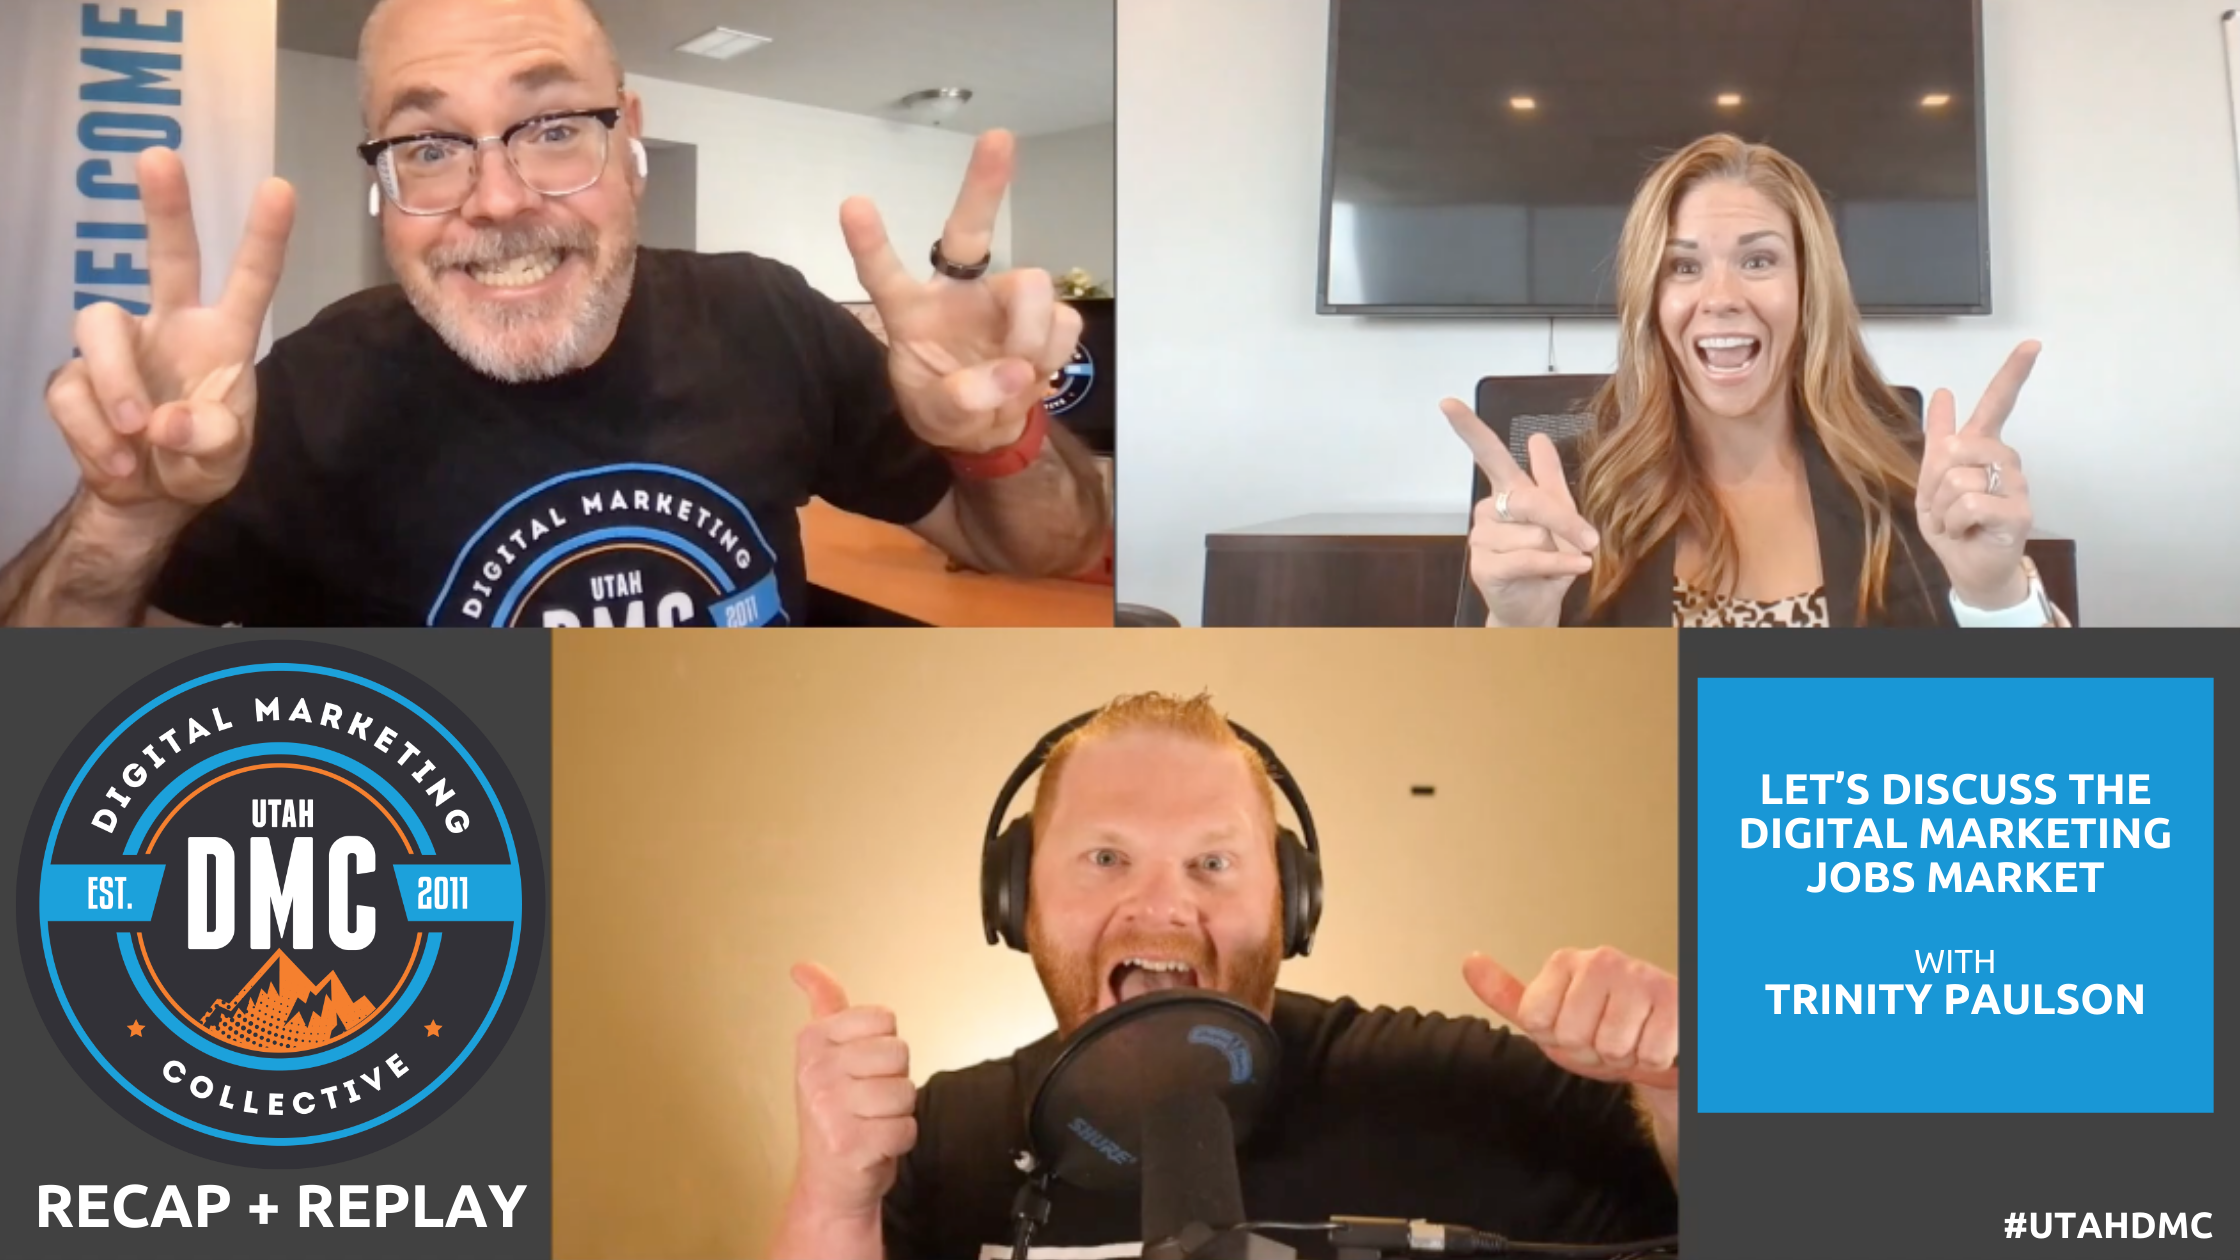 Let’s Discuss the Digital Marketing Jobs Market with Trinity Paulson [Event Recap + Replay]